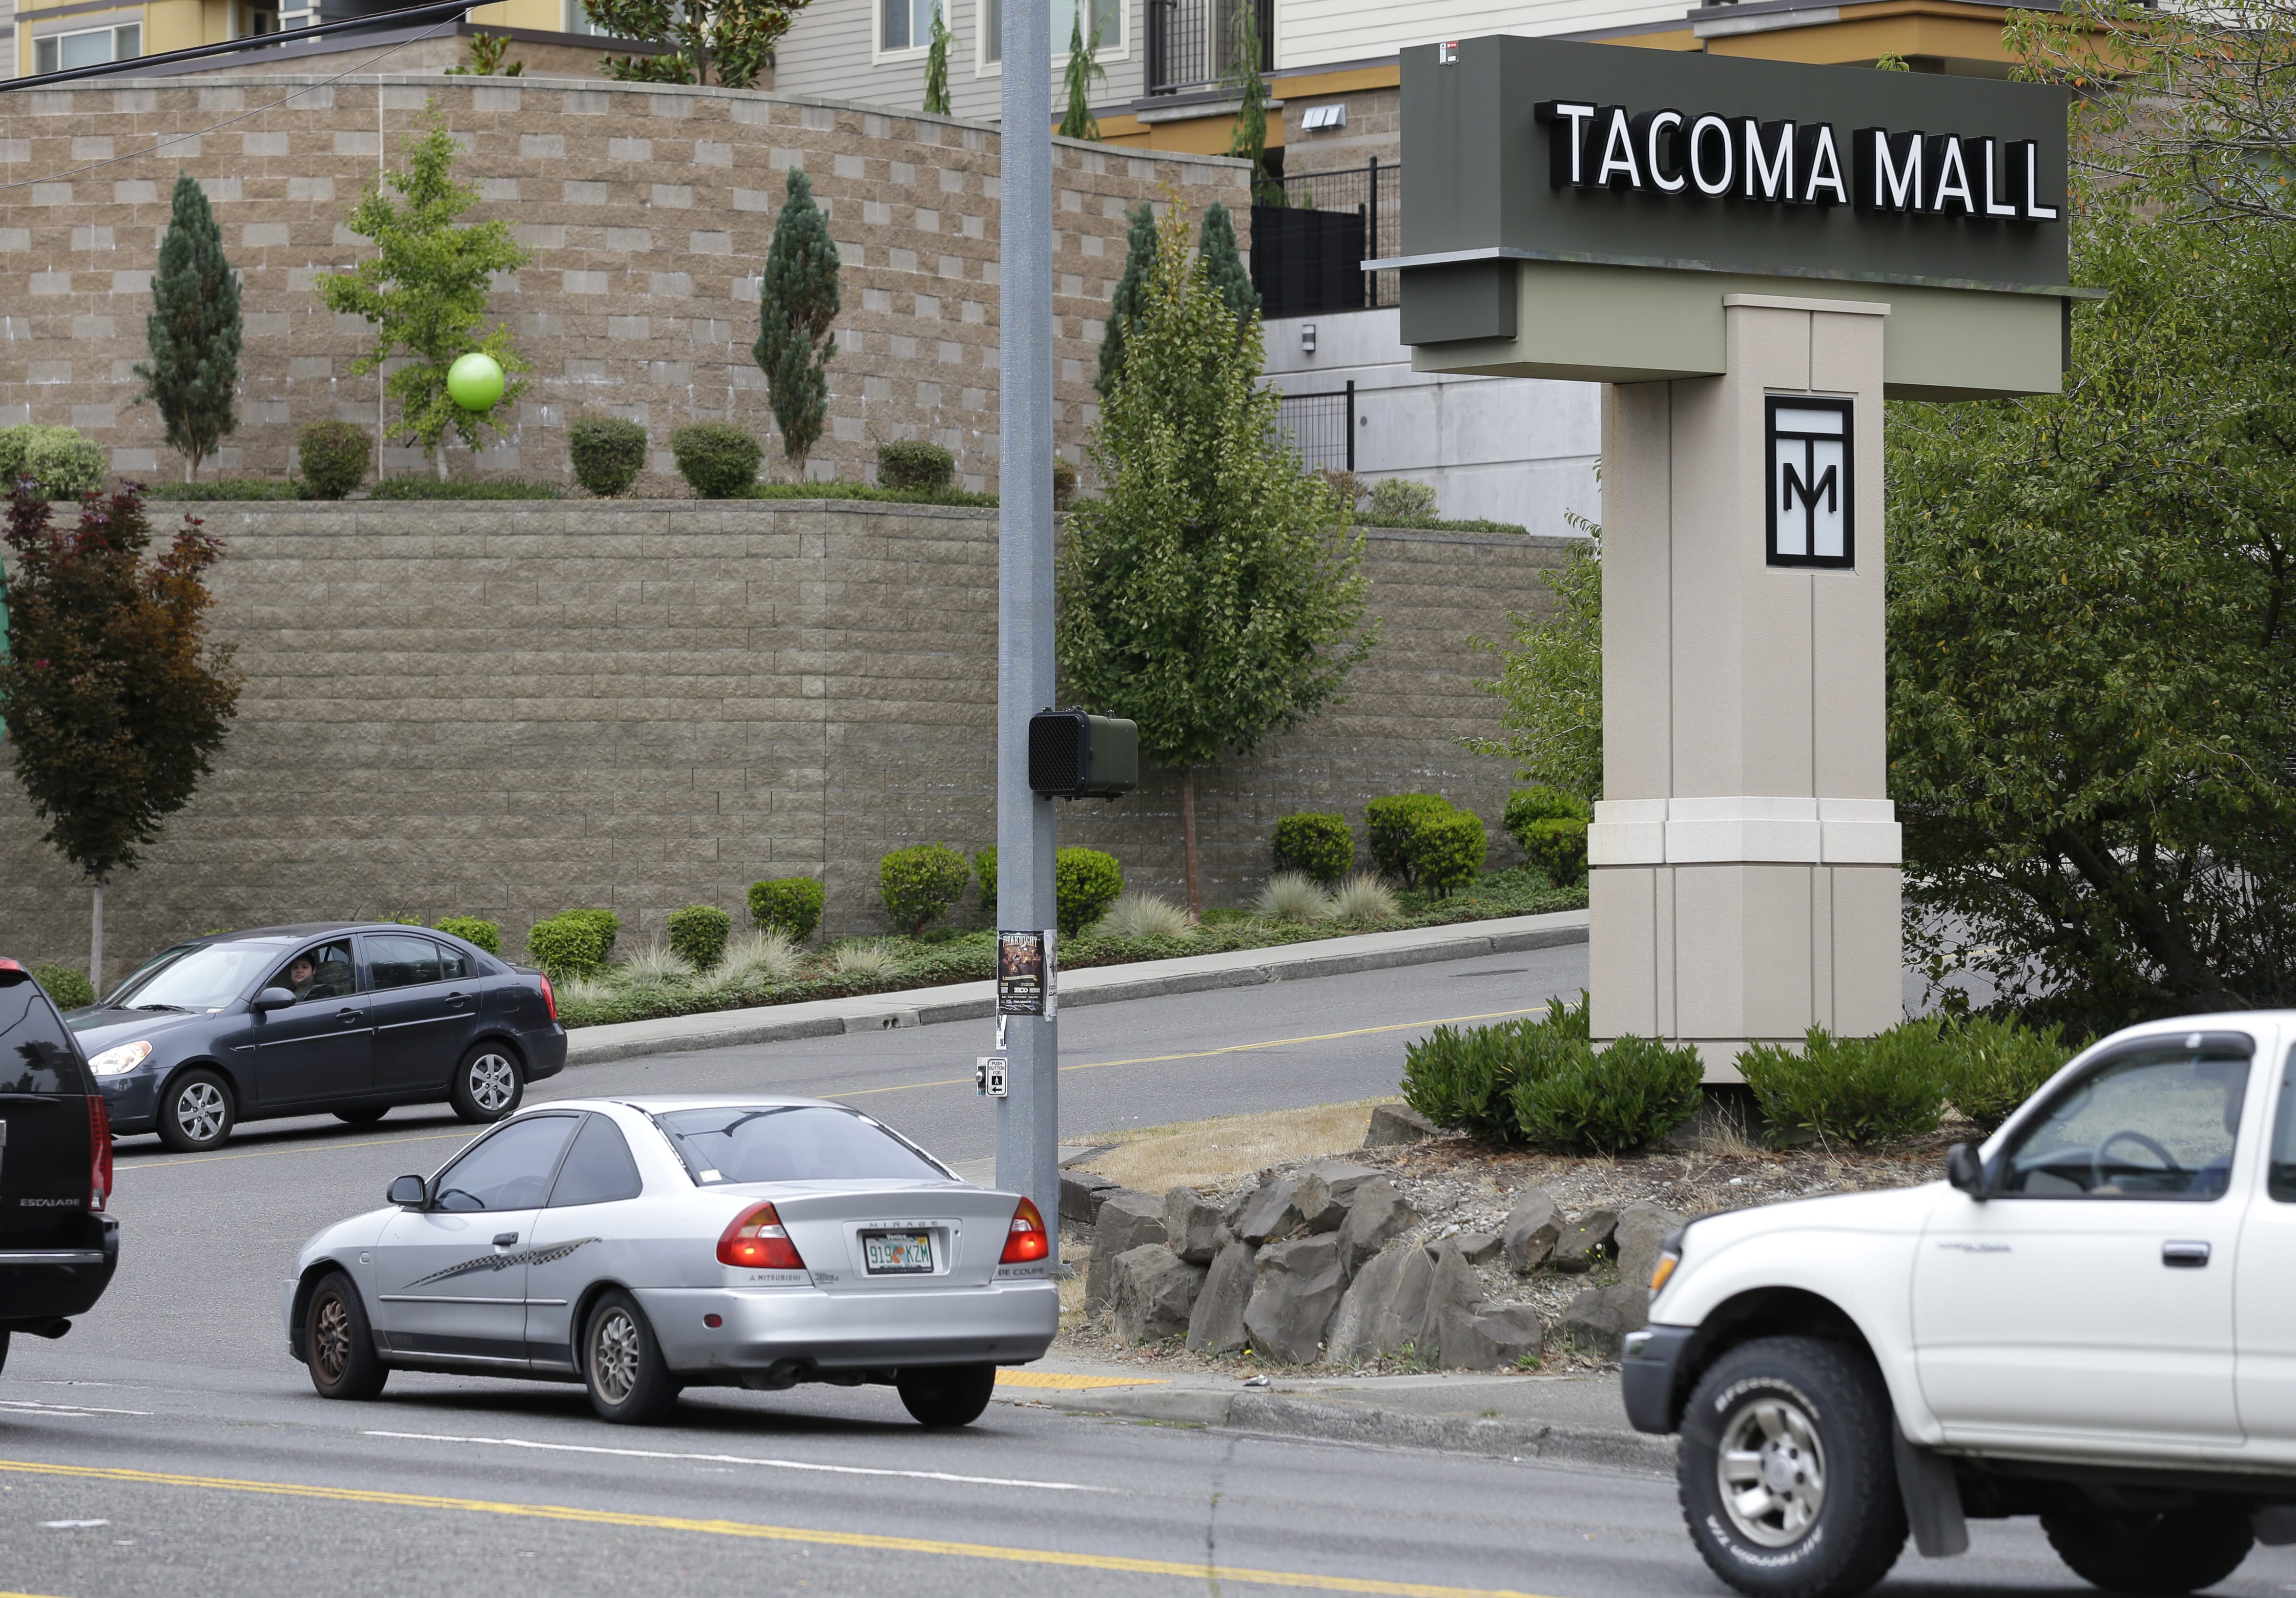 Cars pass by an entrance to the Tacoma Mall, Wednesday, Sept. 7, 2016, in Tacoma, Wash. A Washington state teenager who was riding her bicycle through the mall parking lot when an off-duty officer working as a security guard threw her to the ground and shocked her with a stun gun is suing the Tacoma Police Department. (AP Photo/Ted S.